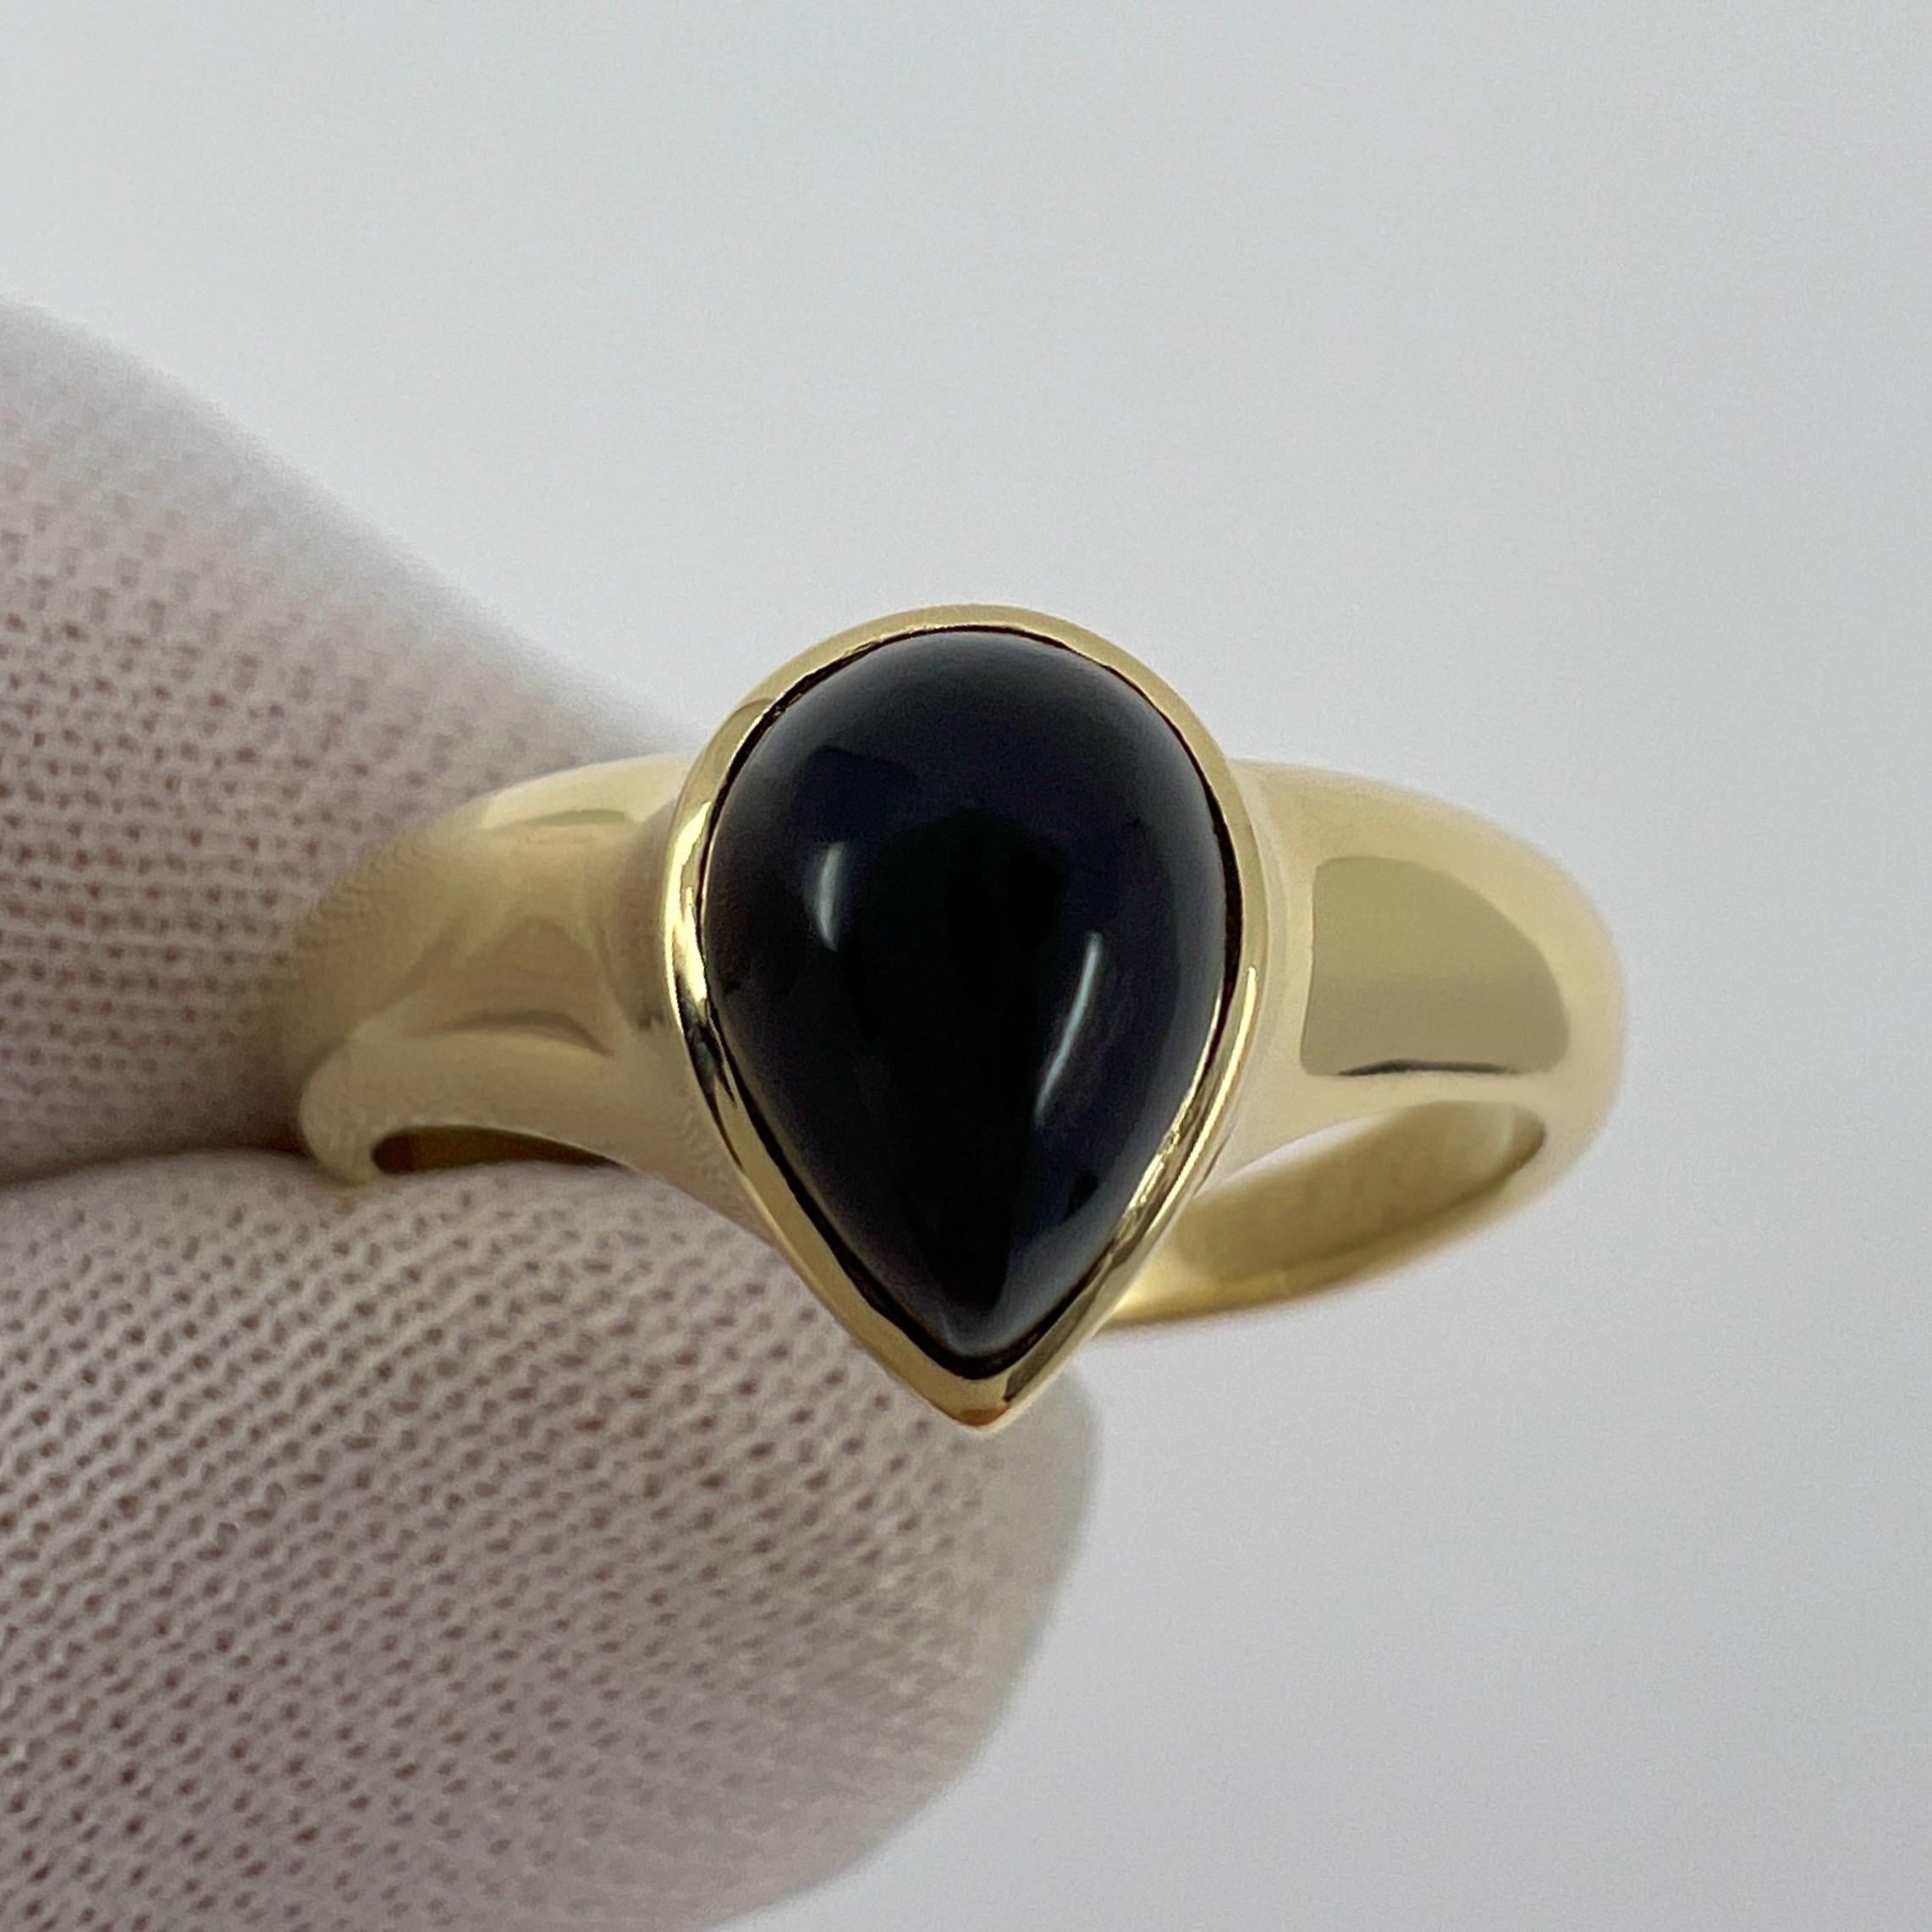 Rare Vintage Van Cleef & Arpels Black Onyx Pear Cabochon 18k Yellow Gold Ring For Sale 3